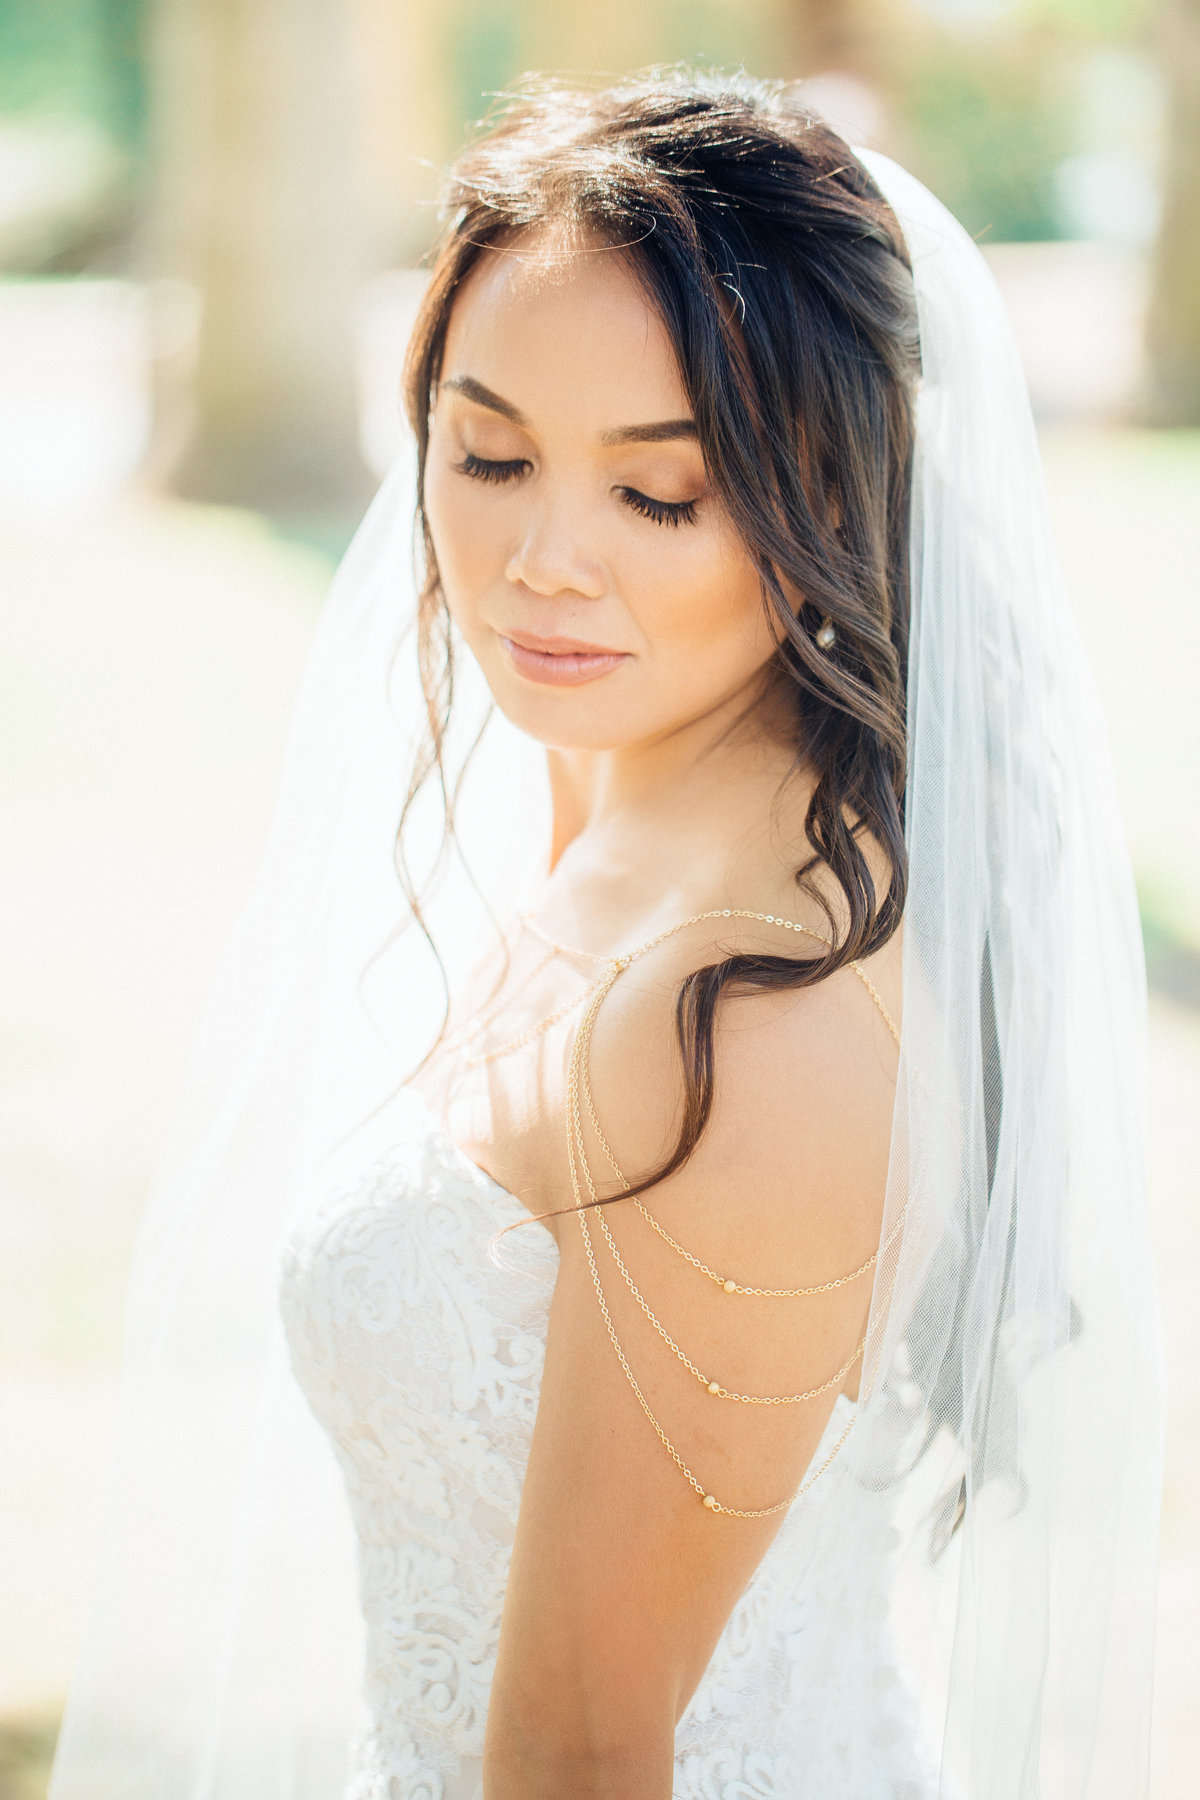 Wedding Photograph Of Bride In White Gown In Side View Los Angeles